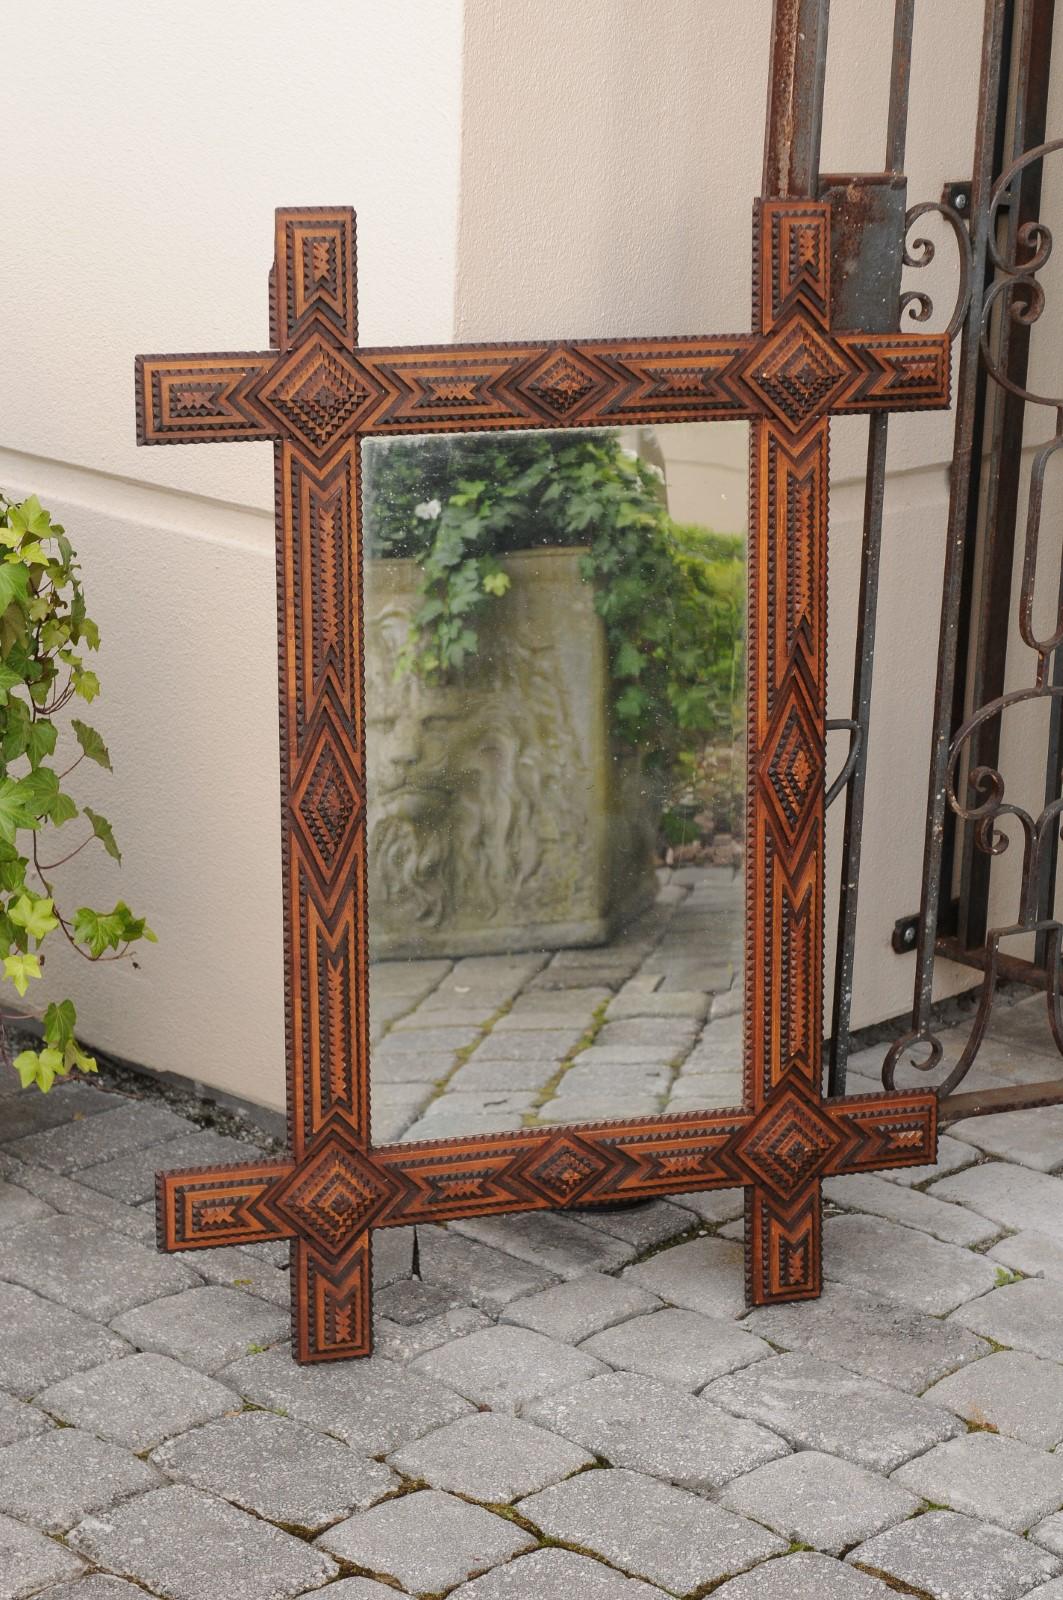 A French Tramp Art mirror from the turn of the century with alternating diamond motifs and contrasting colors . Born in the early years of the 20th century, this French mirror was hand carved in the manner typical of the Tramp Art style. Consisting